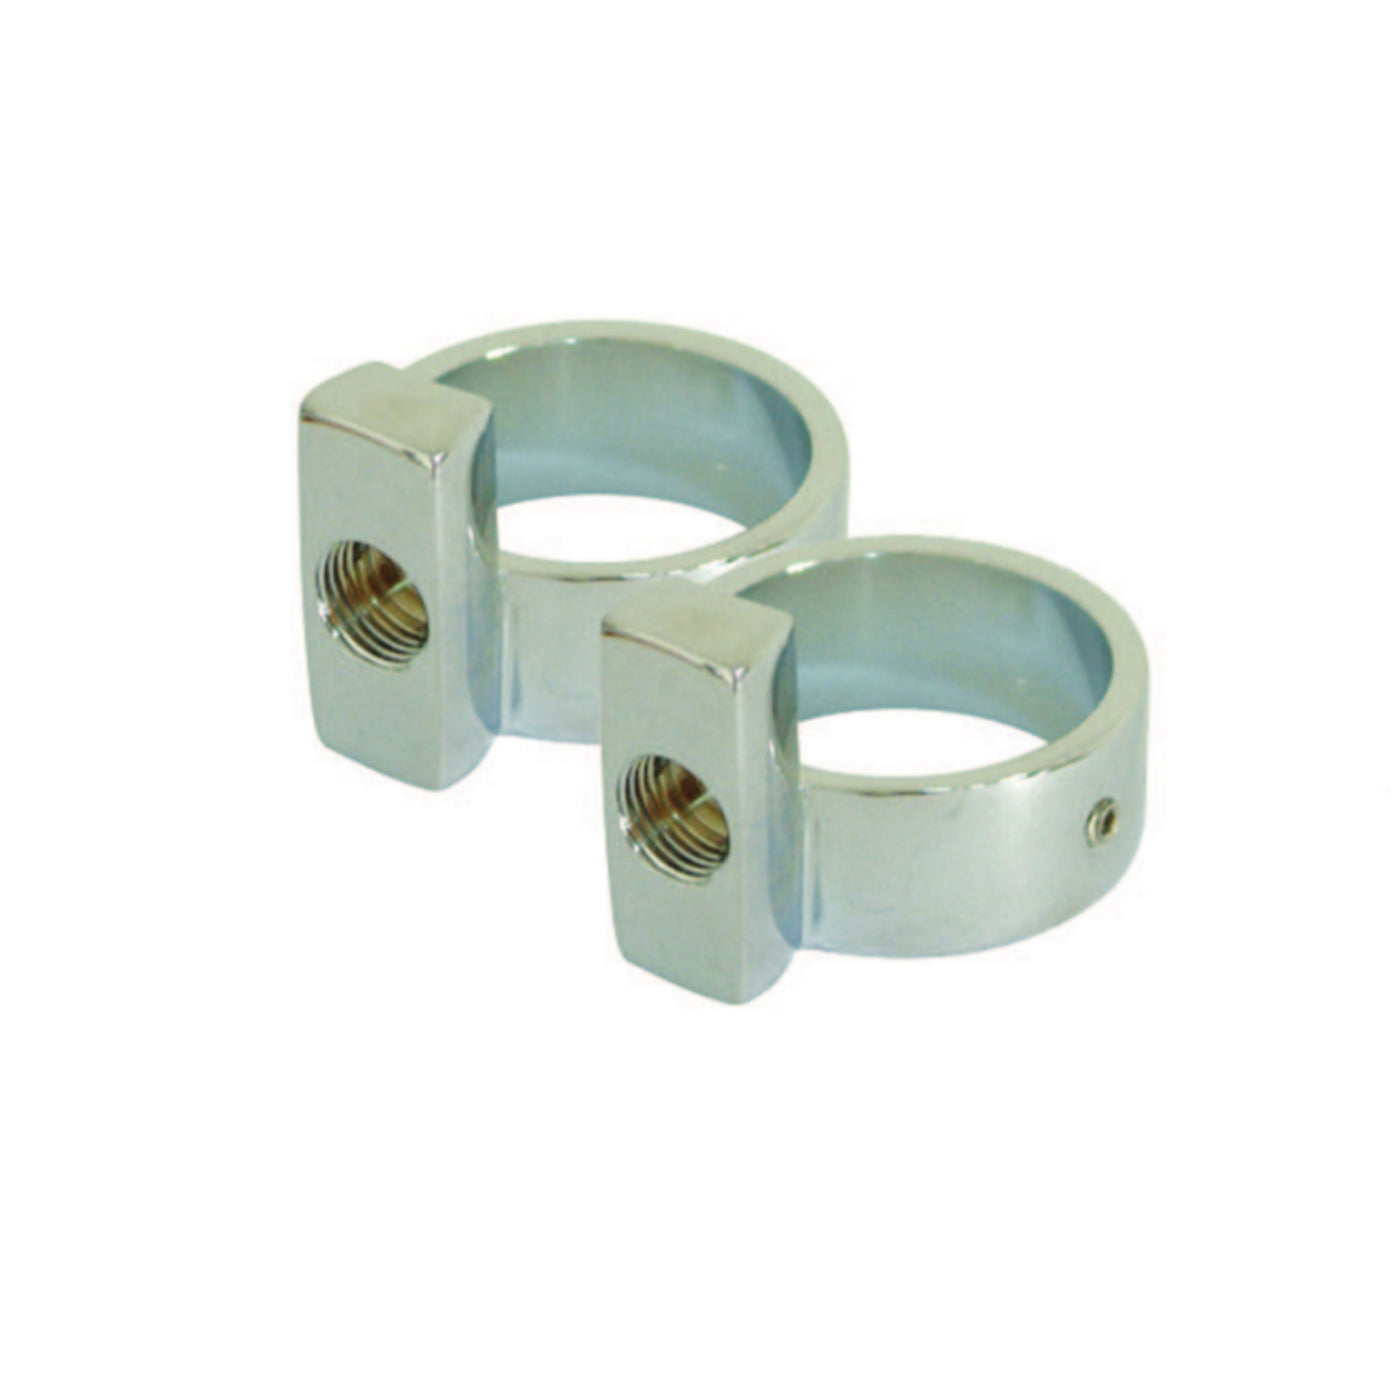 Elements of Design DS431 Drain Bracelets for Supply Line Support from CC451, Polished Chrome